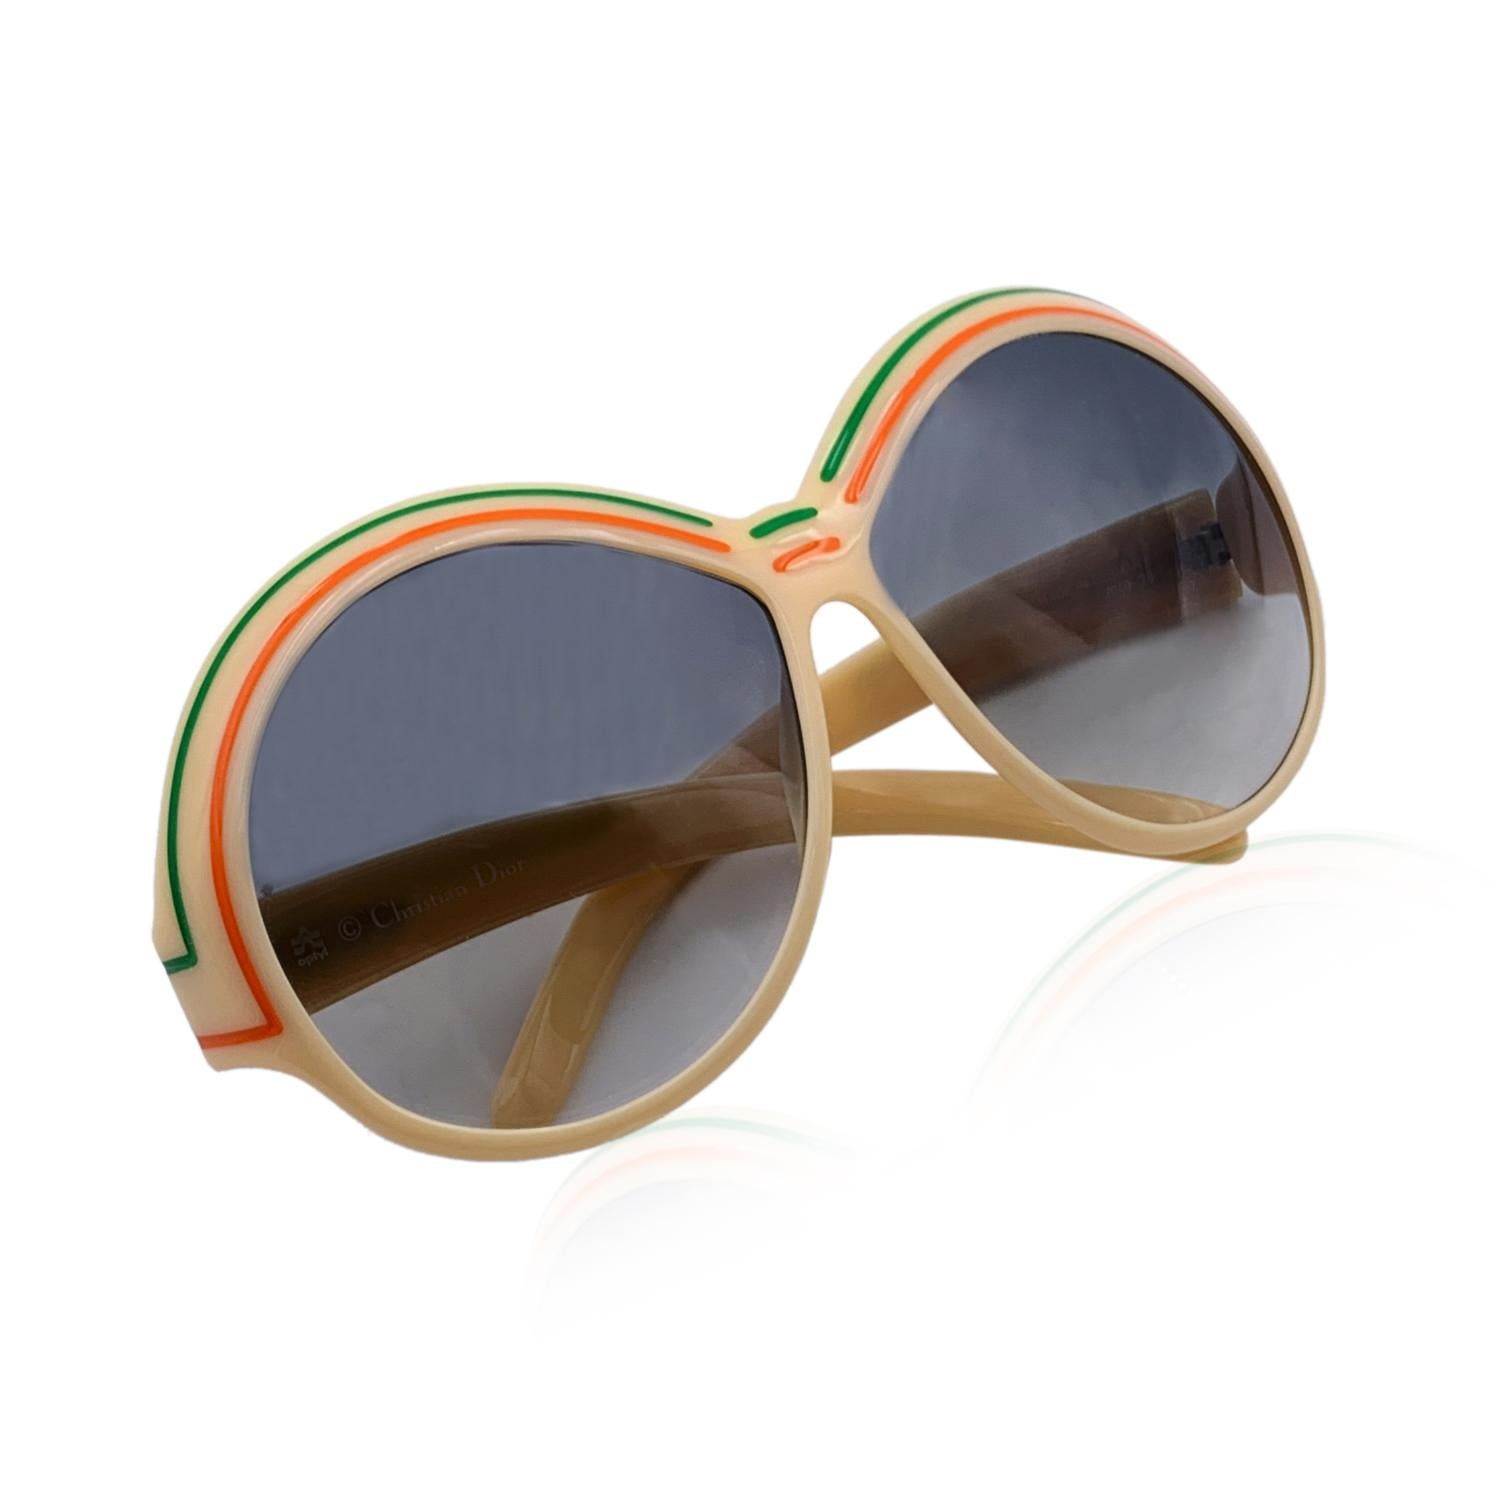 Vintage Christian Dior oversize sunglasses, Mod. 2040 - Col 70. Beige Optyl frame with green and orange striped detailing. Original 100% Total UVA/UVB protection in gradient grey color. CD logo on temples. Made in Germany

Details

MATERIAL: